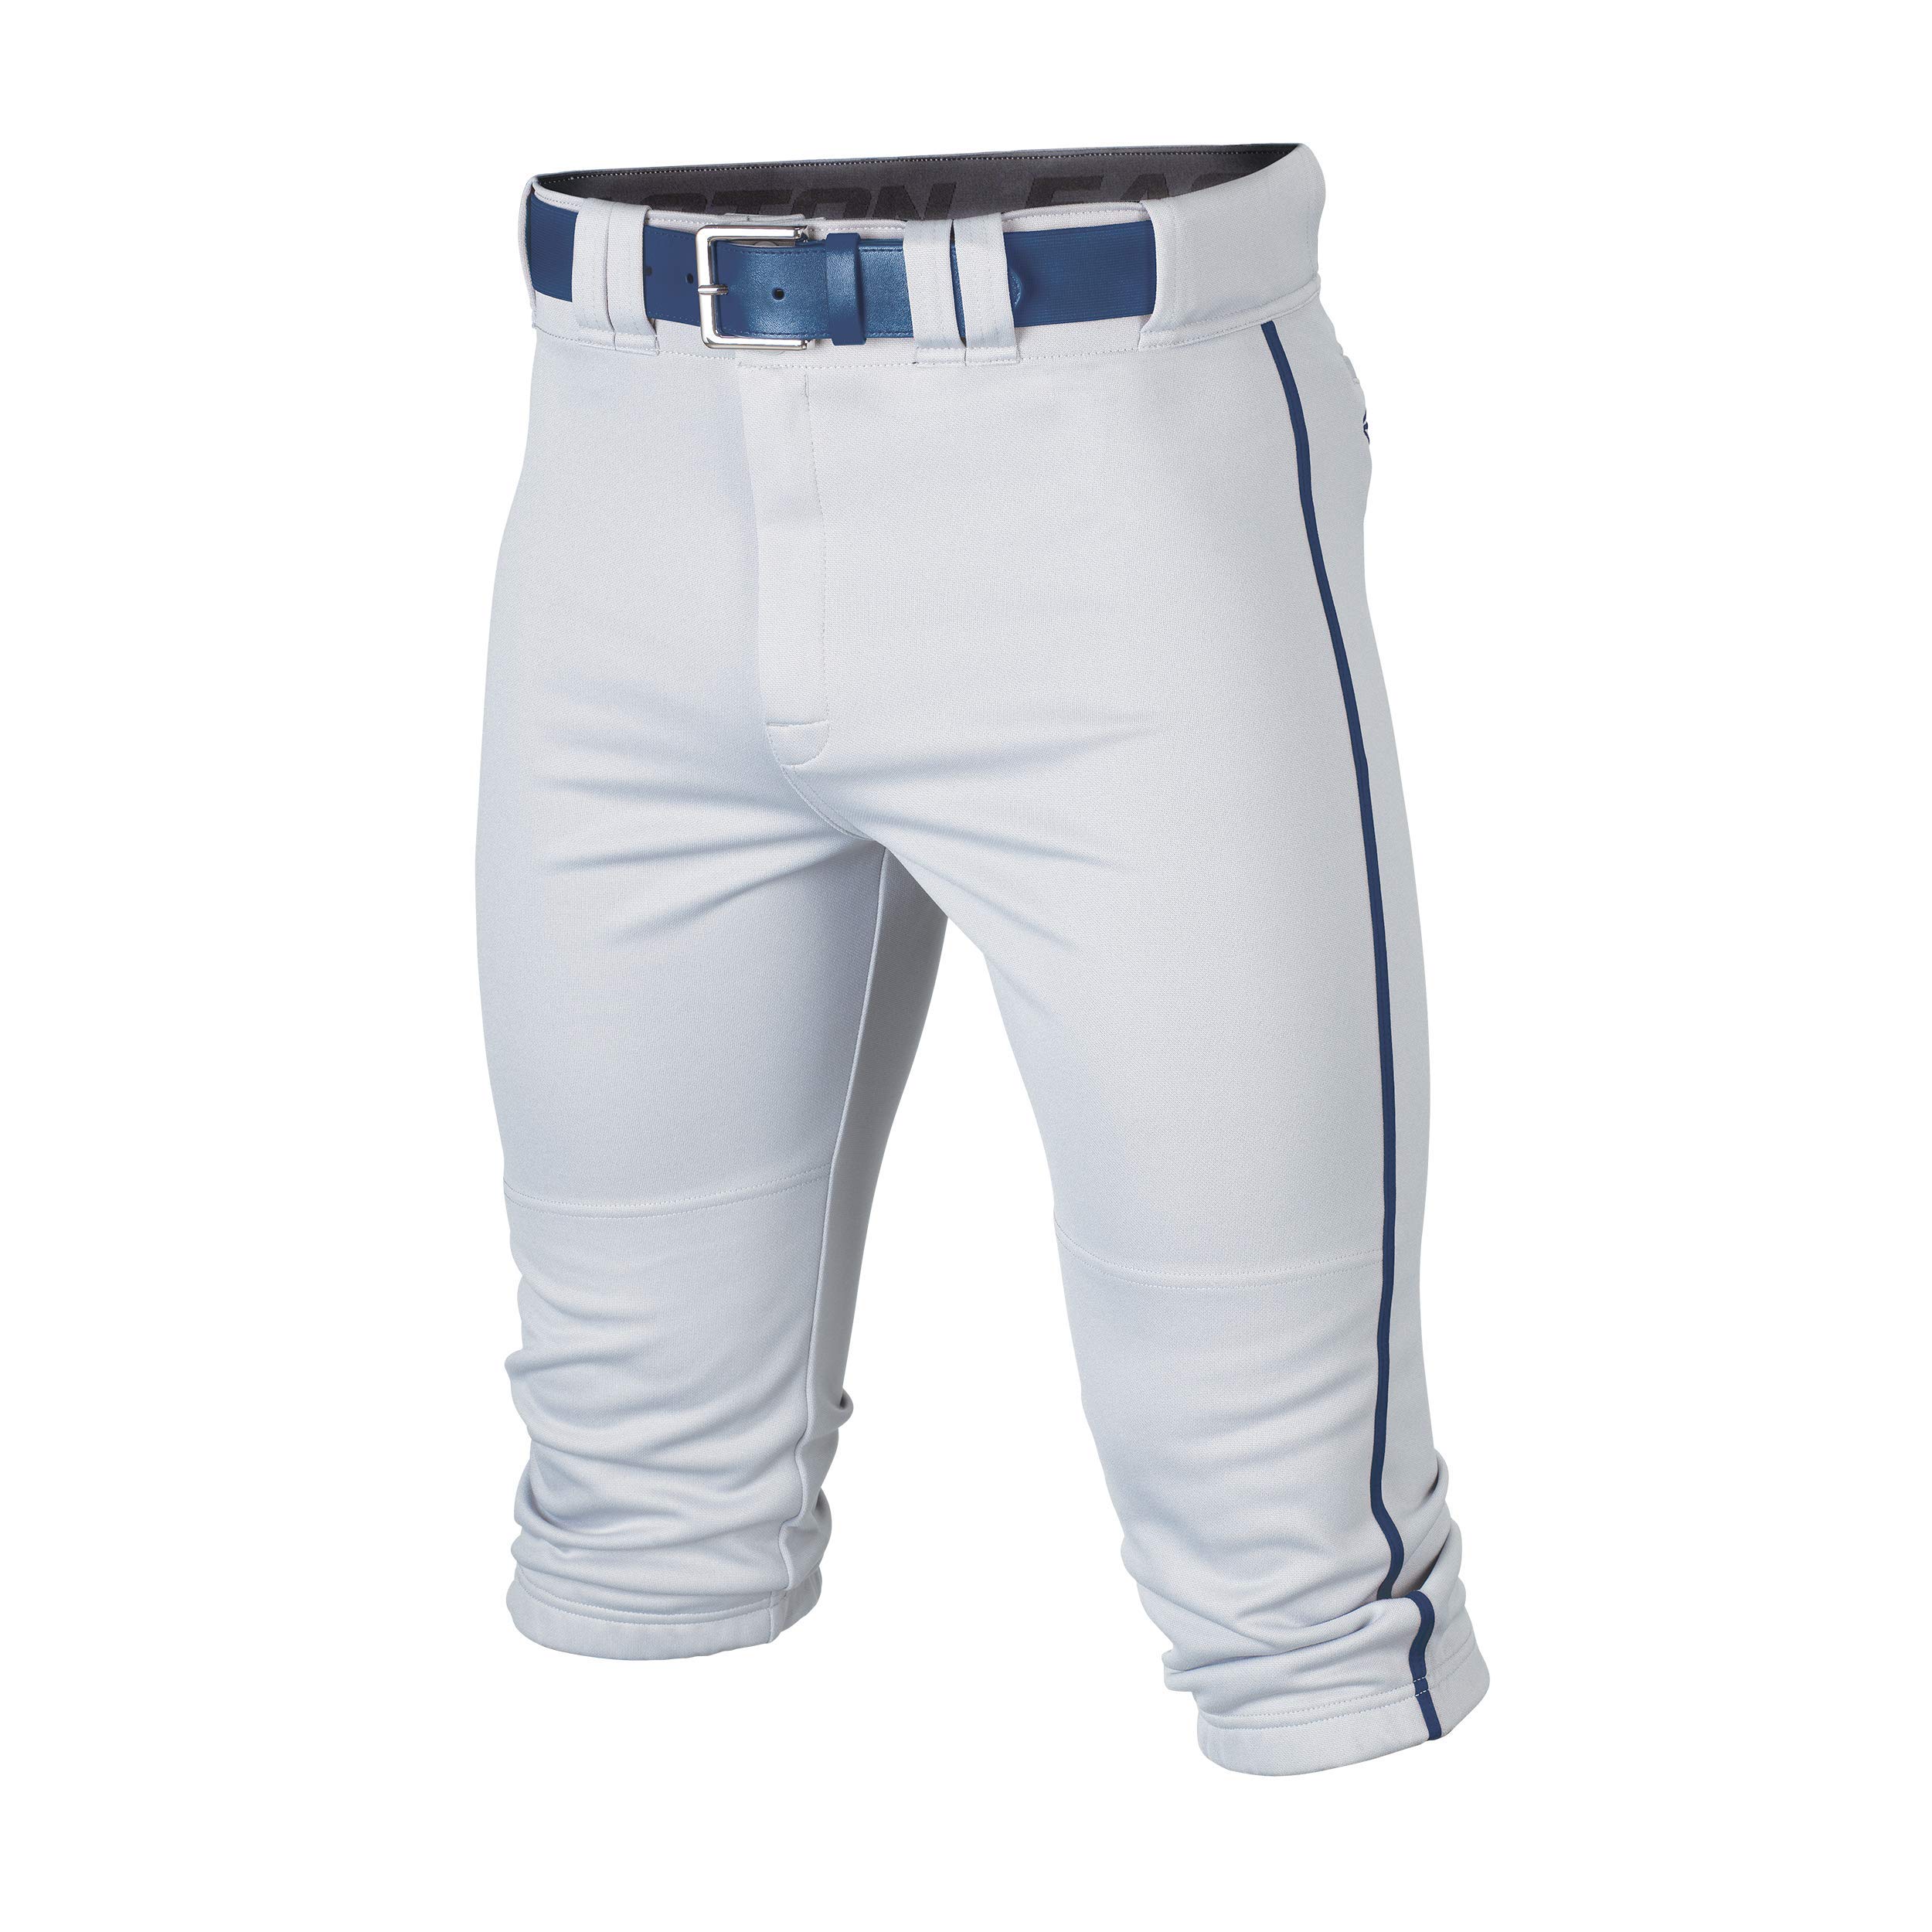 Easton RIVAL KNIcKER Piped Baseball Pant, WhiteNavy, Youth, Large